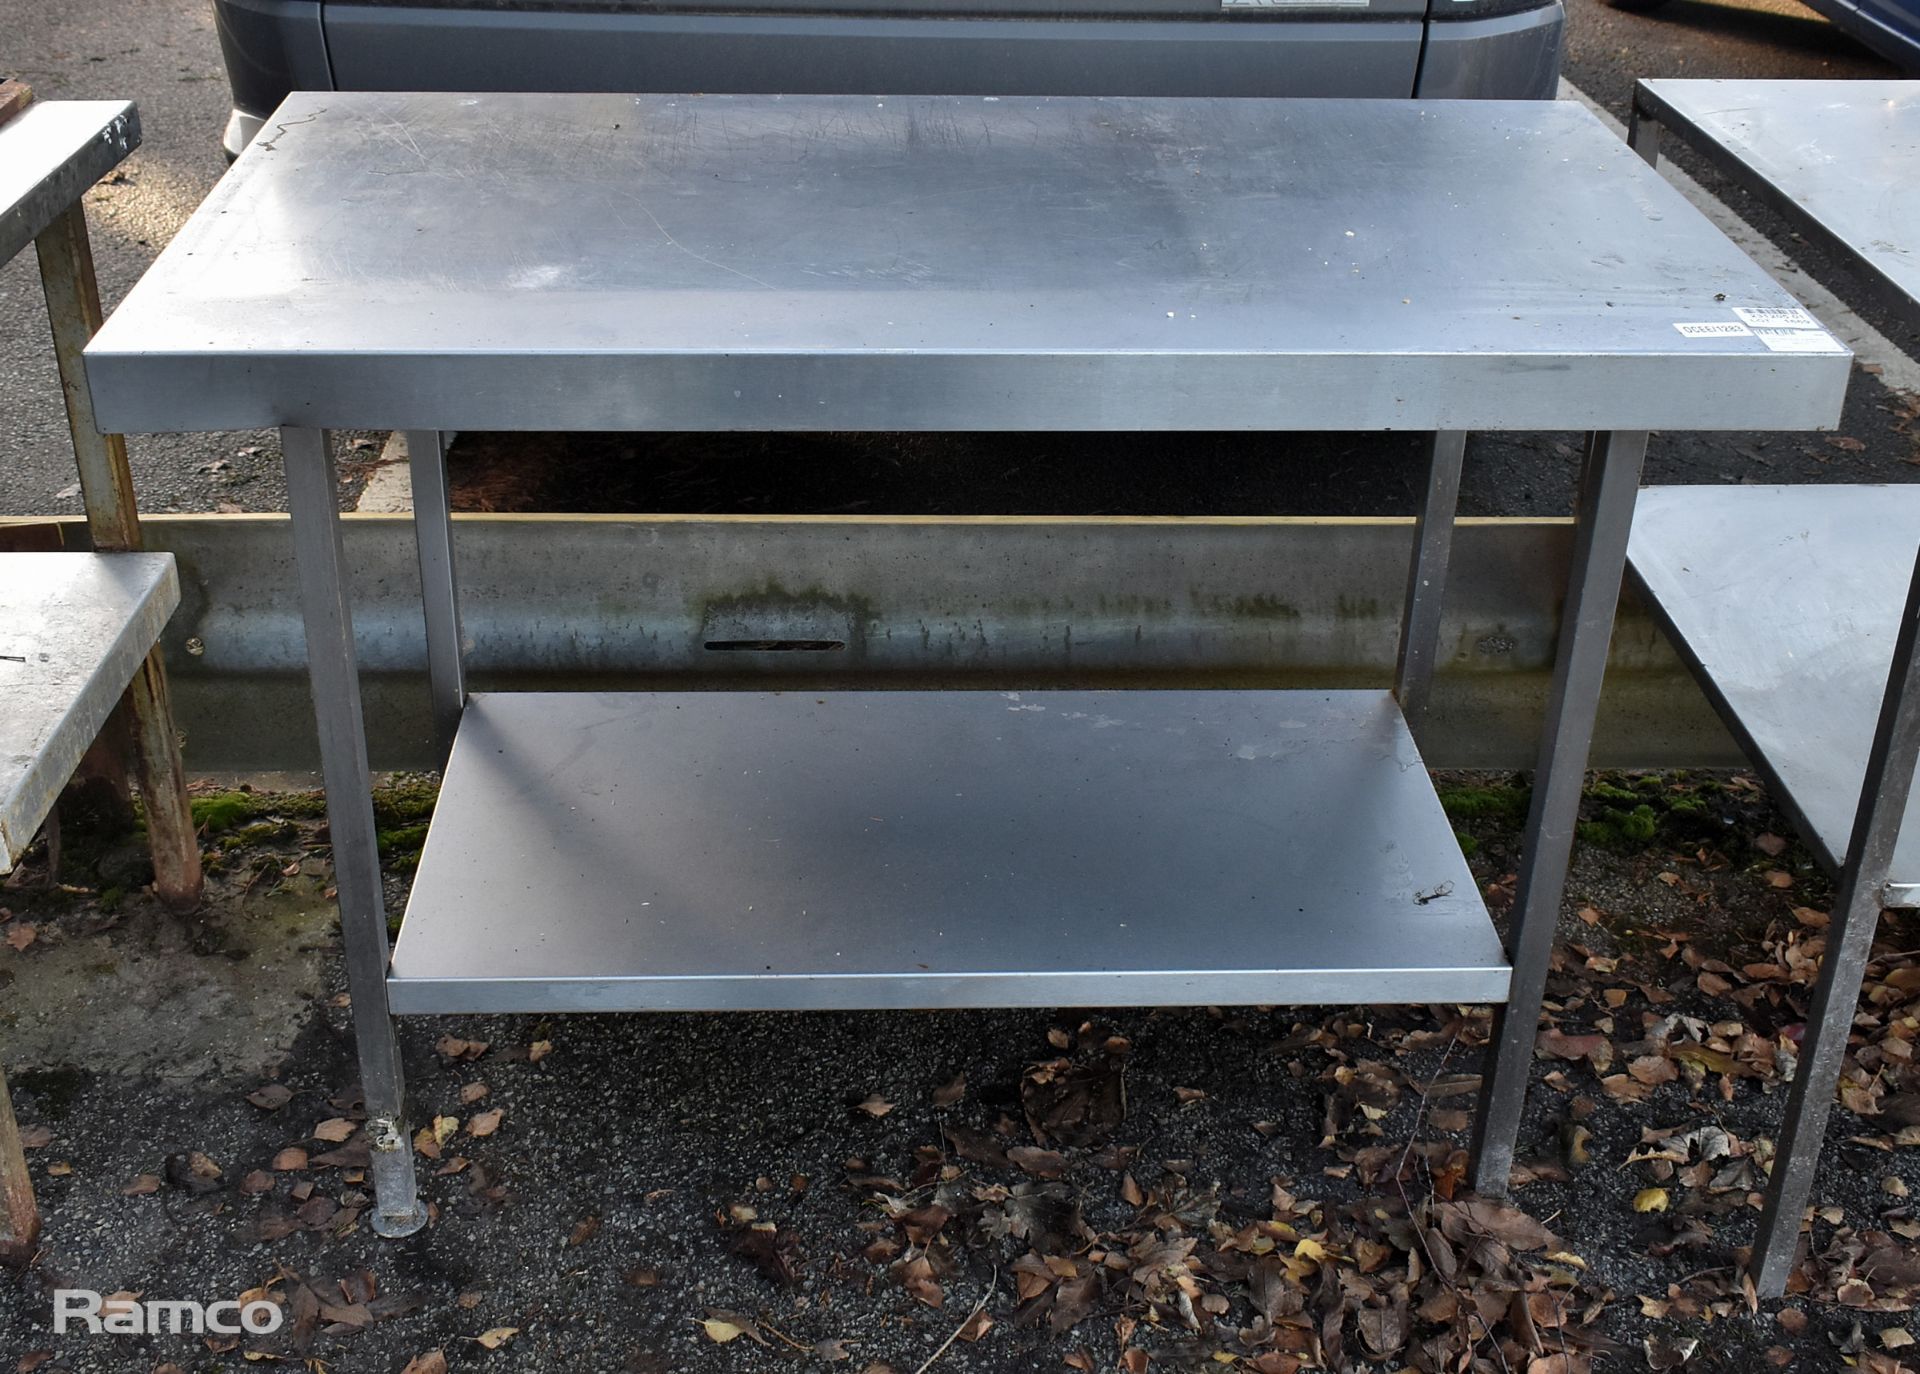 Stainless steel preparation table - L 1200 x W 650 x H 860mm